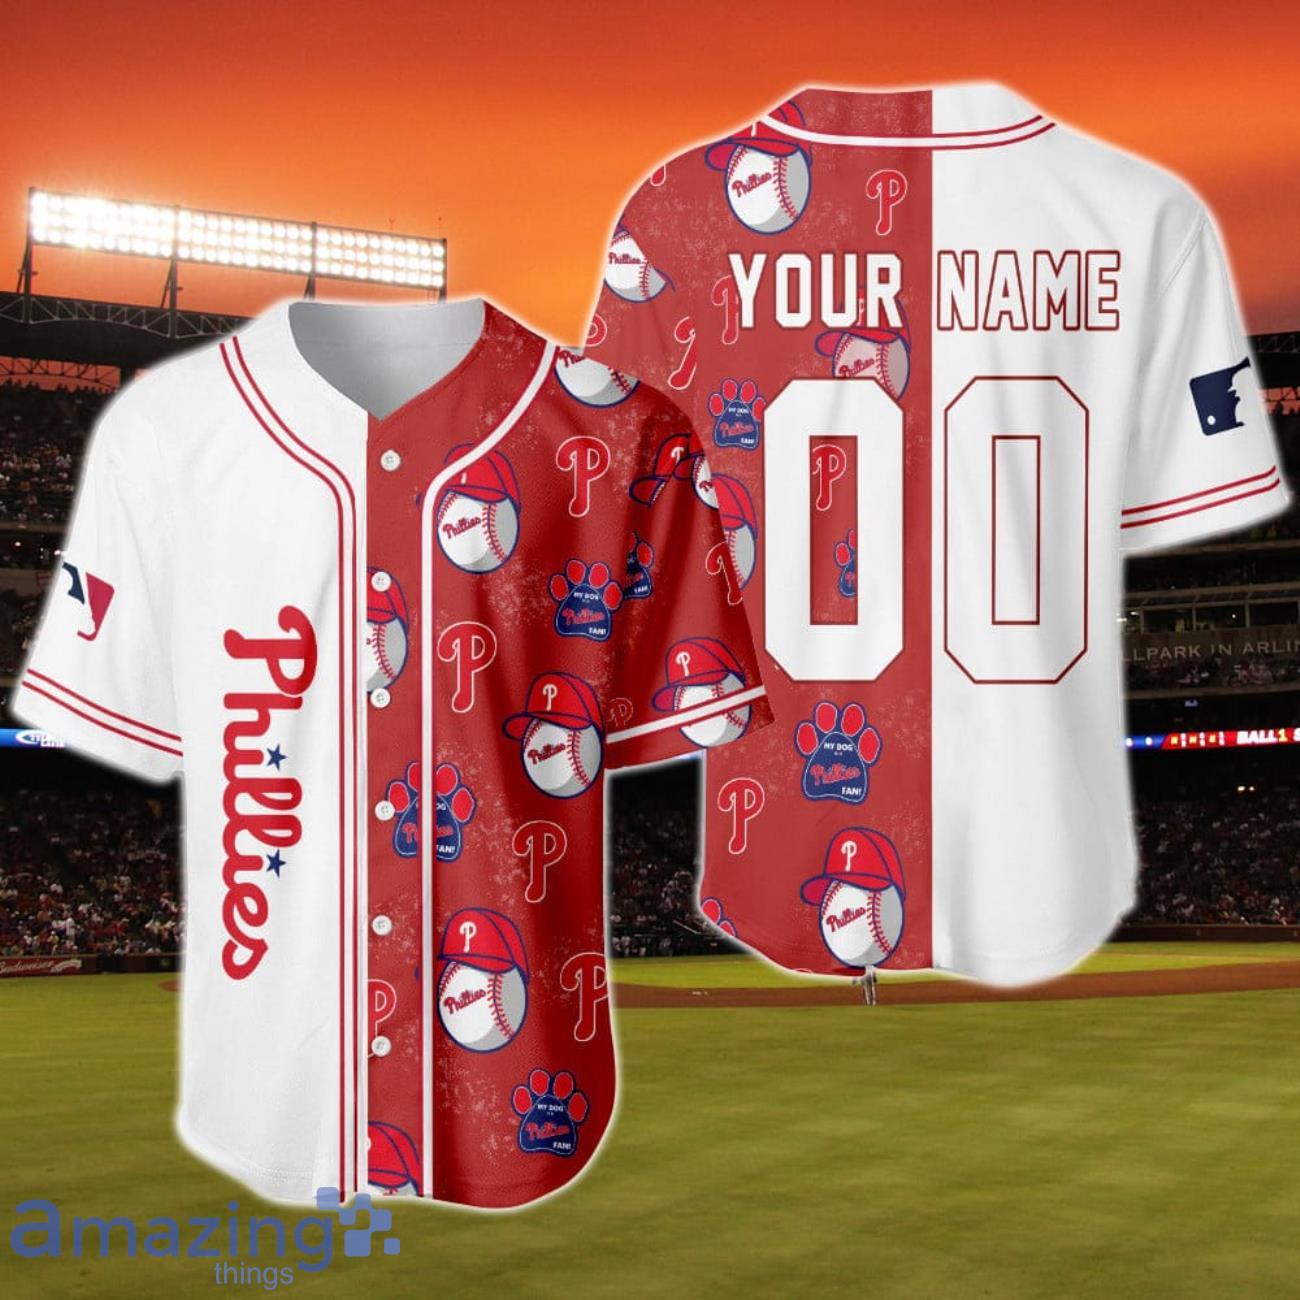 phillies jersey for dog